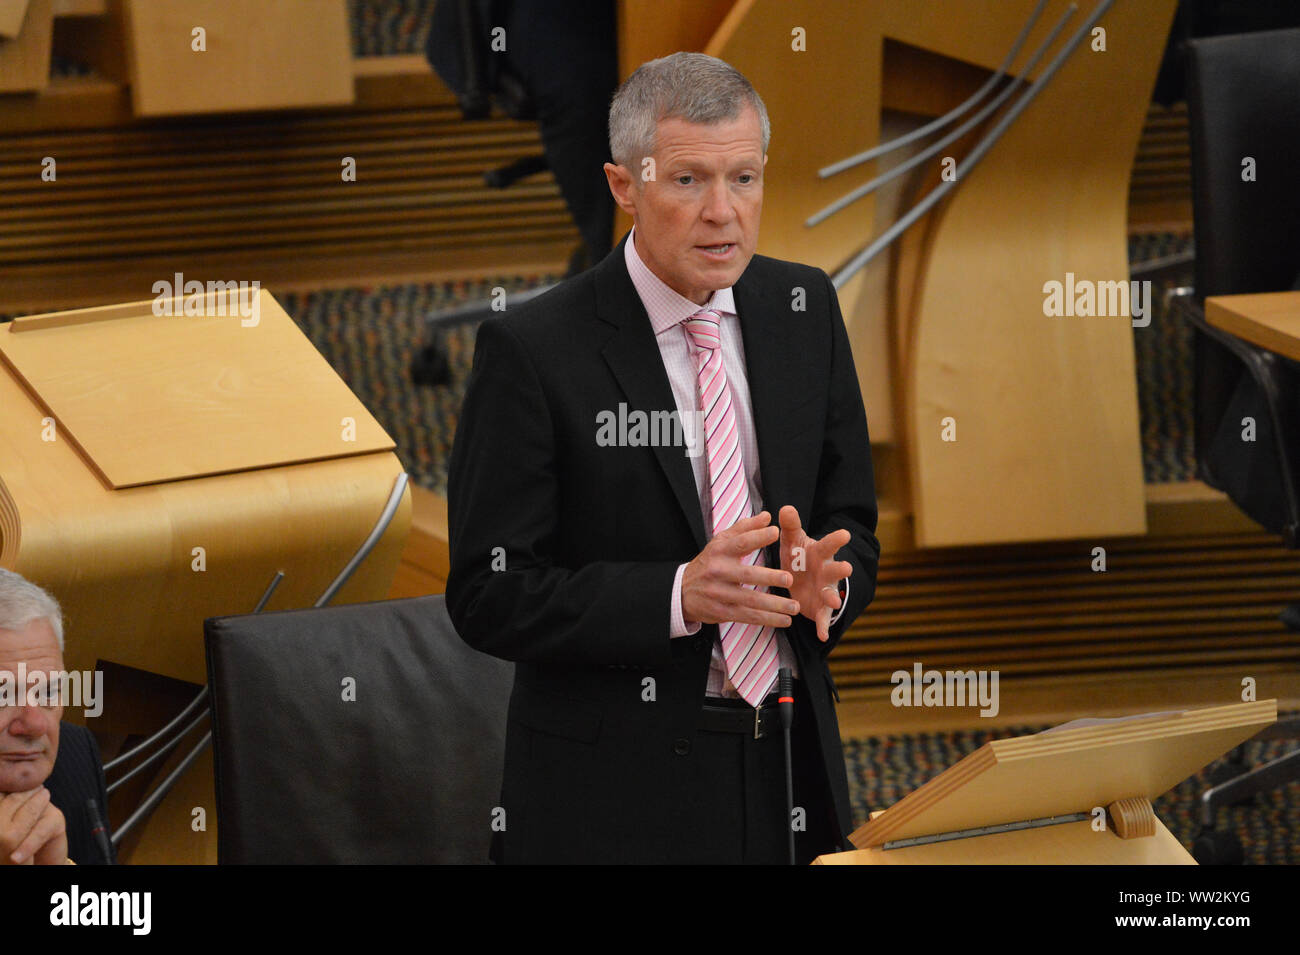 Edinburgh, UK. 12th Sep, 2019. Pictured: Willie Rennie MSP - Leader of the Scottish Liberal Democrat Party. Weekly session of First Ministers Questions as the Scottish Parliament tries to steer a path through the fallout of the latest Brexit mess and prevent Scotland from leaving the EU. Credit: Colin Fisher/Alamy Live News Stock Photo